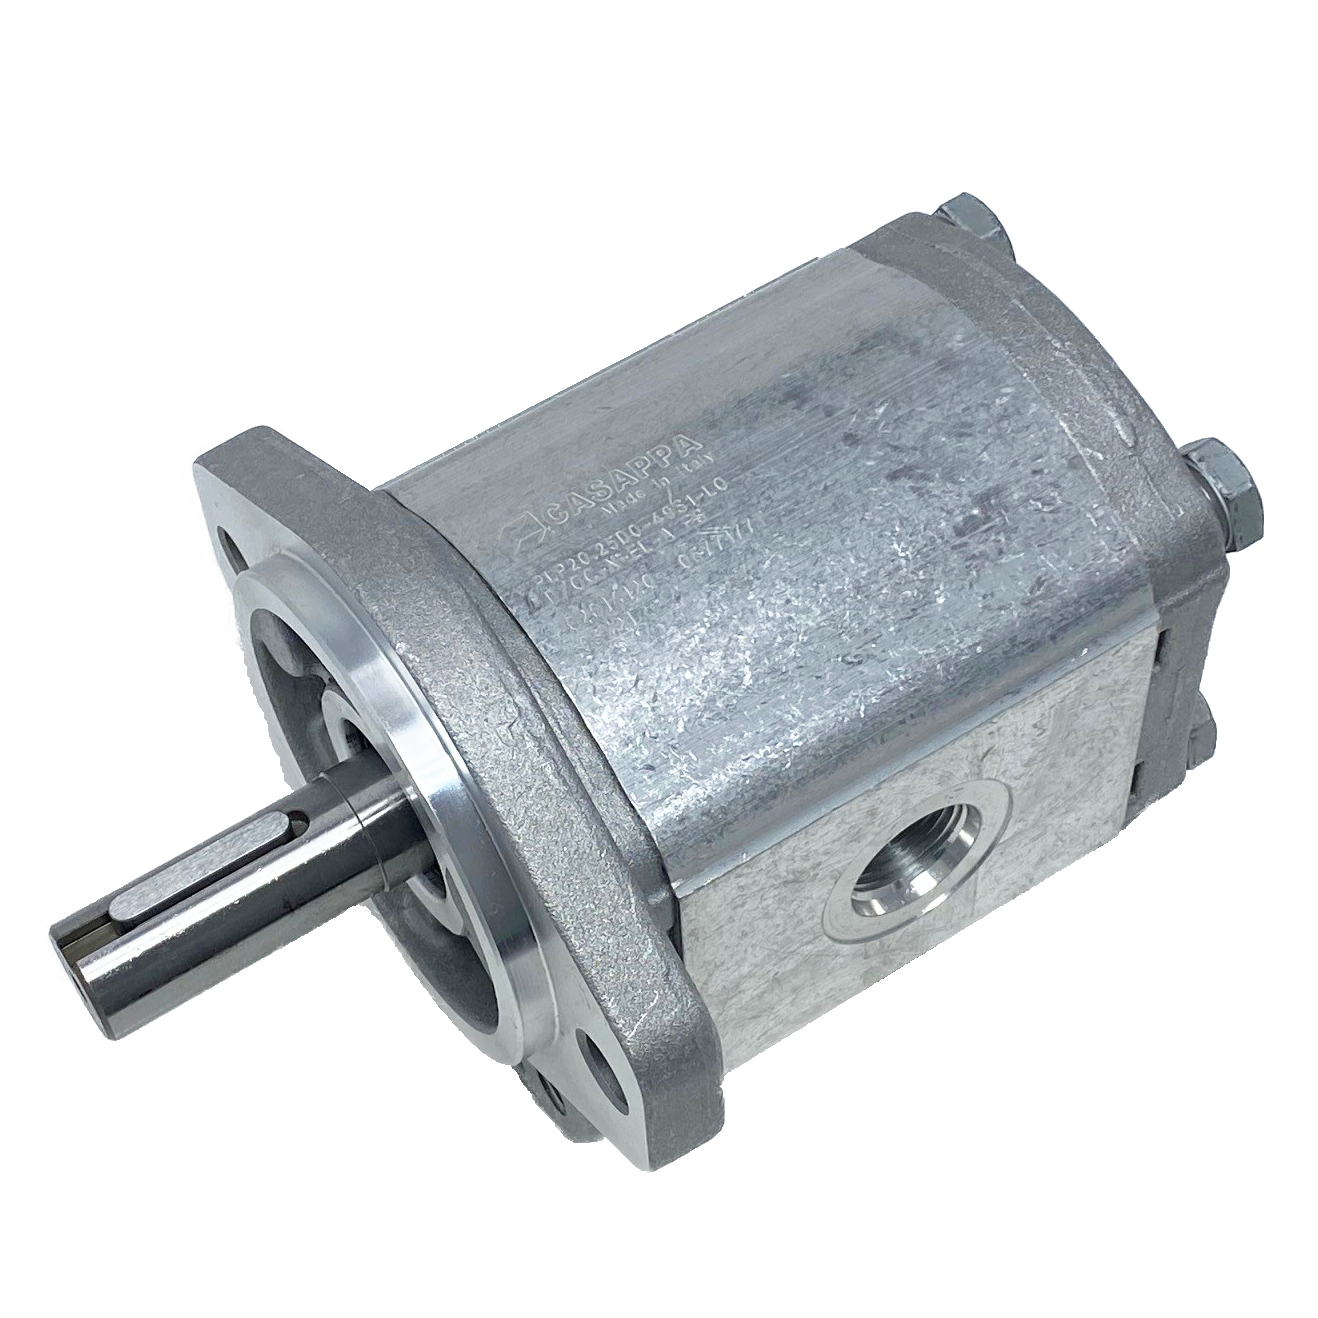 PHM20.27,8B0-49S9-LOC/OG-N-EL : Casappa Polaris Gear Motor, 28.21cc, 2900psi Rated, 2500RPM, Reversible Interior Drain, 3/4" Bore x 3/16" Key Shaft, SAE A 2-Bolt Flange, 0.625 (5/8") #10 SAE Inlet, 1.25" #20 SAE Outlet, Cast Iron Body, Aluminum Flange